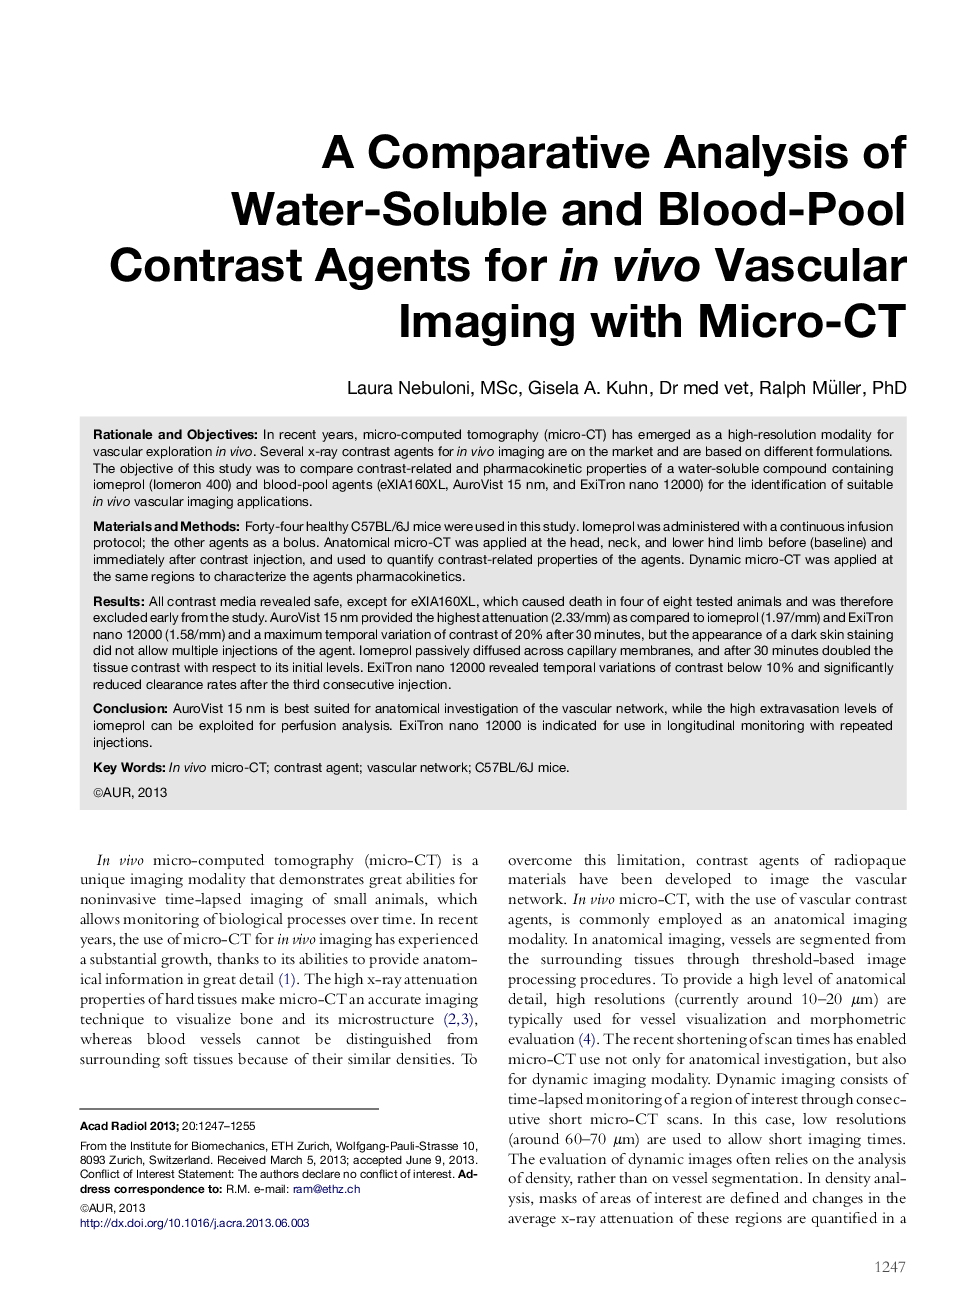 A Comparative Analysis of Water-Soluble and Blood-Pool Contrast Agents for inÂ vivo Vascular Imaging with Micro-CT